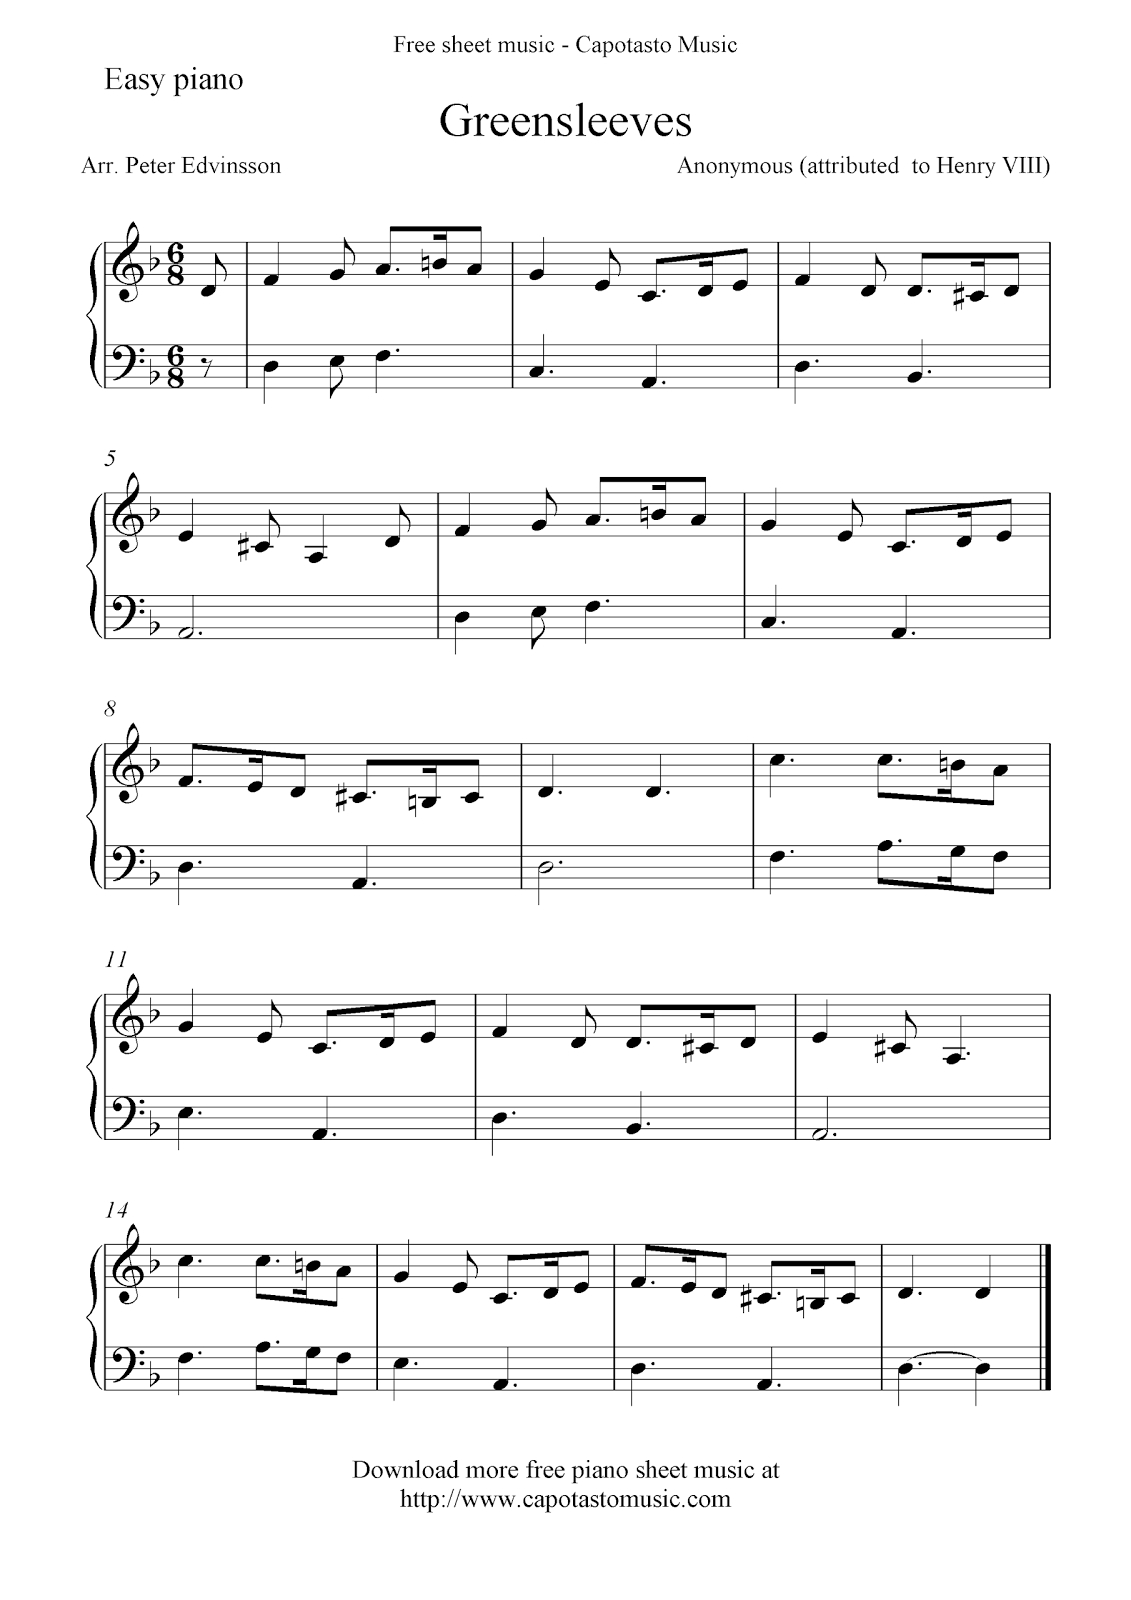 Free Sheet Music Scores: Free #piano Sheet Music Notes, Greensleeves - Free Printable Classical Sheet Music For Piano